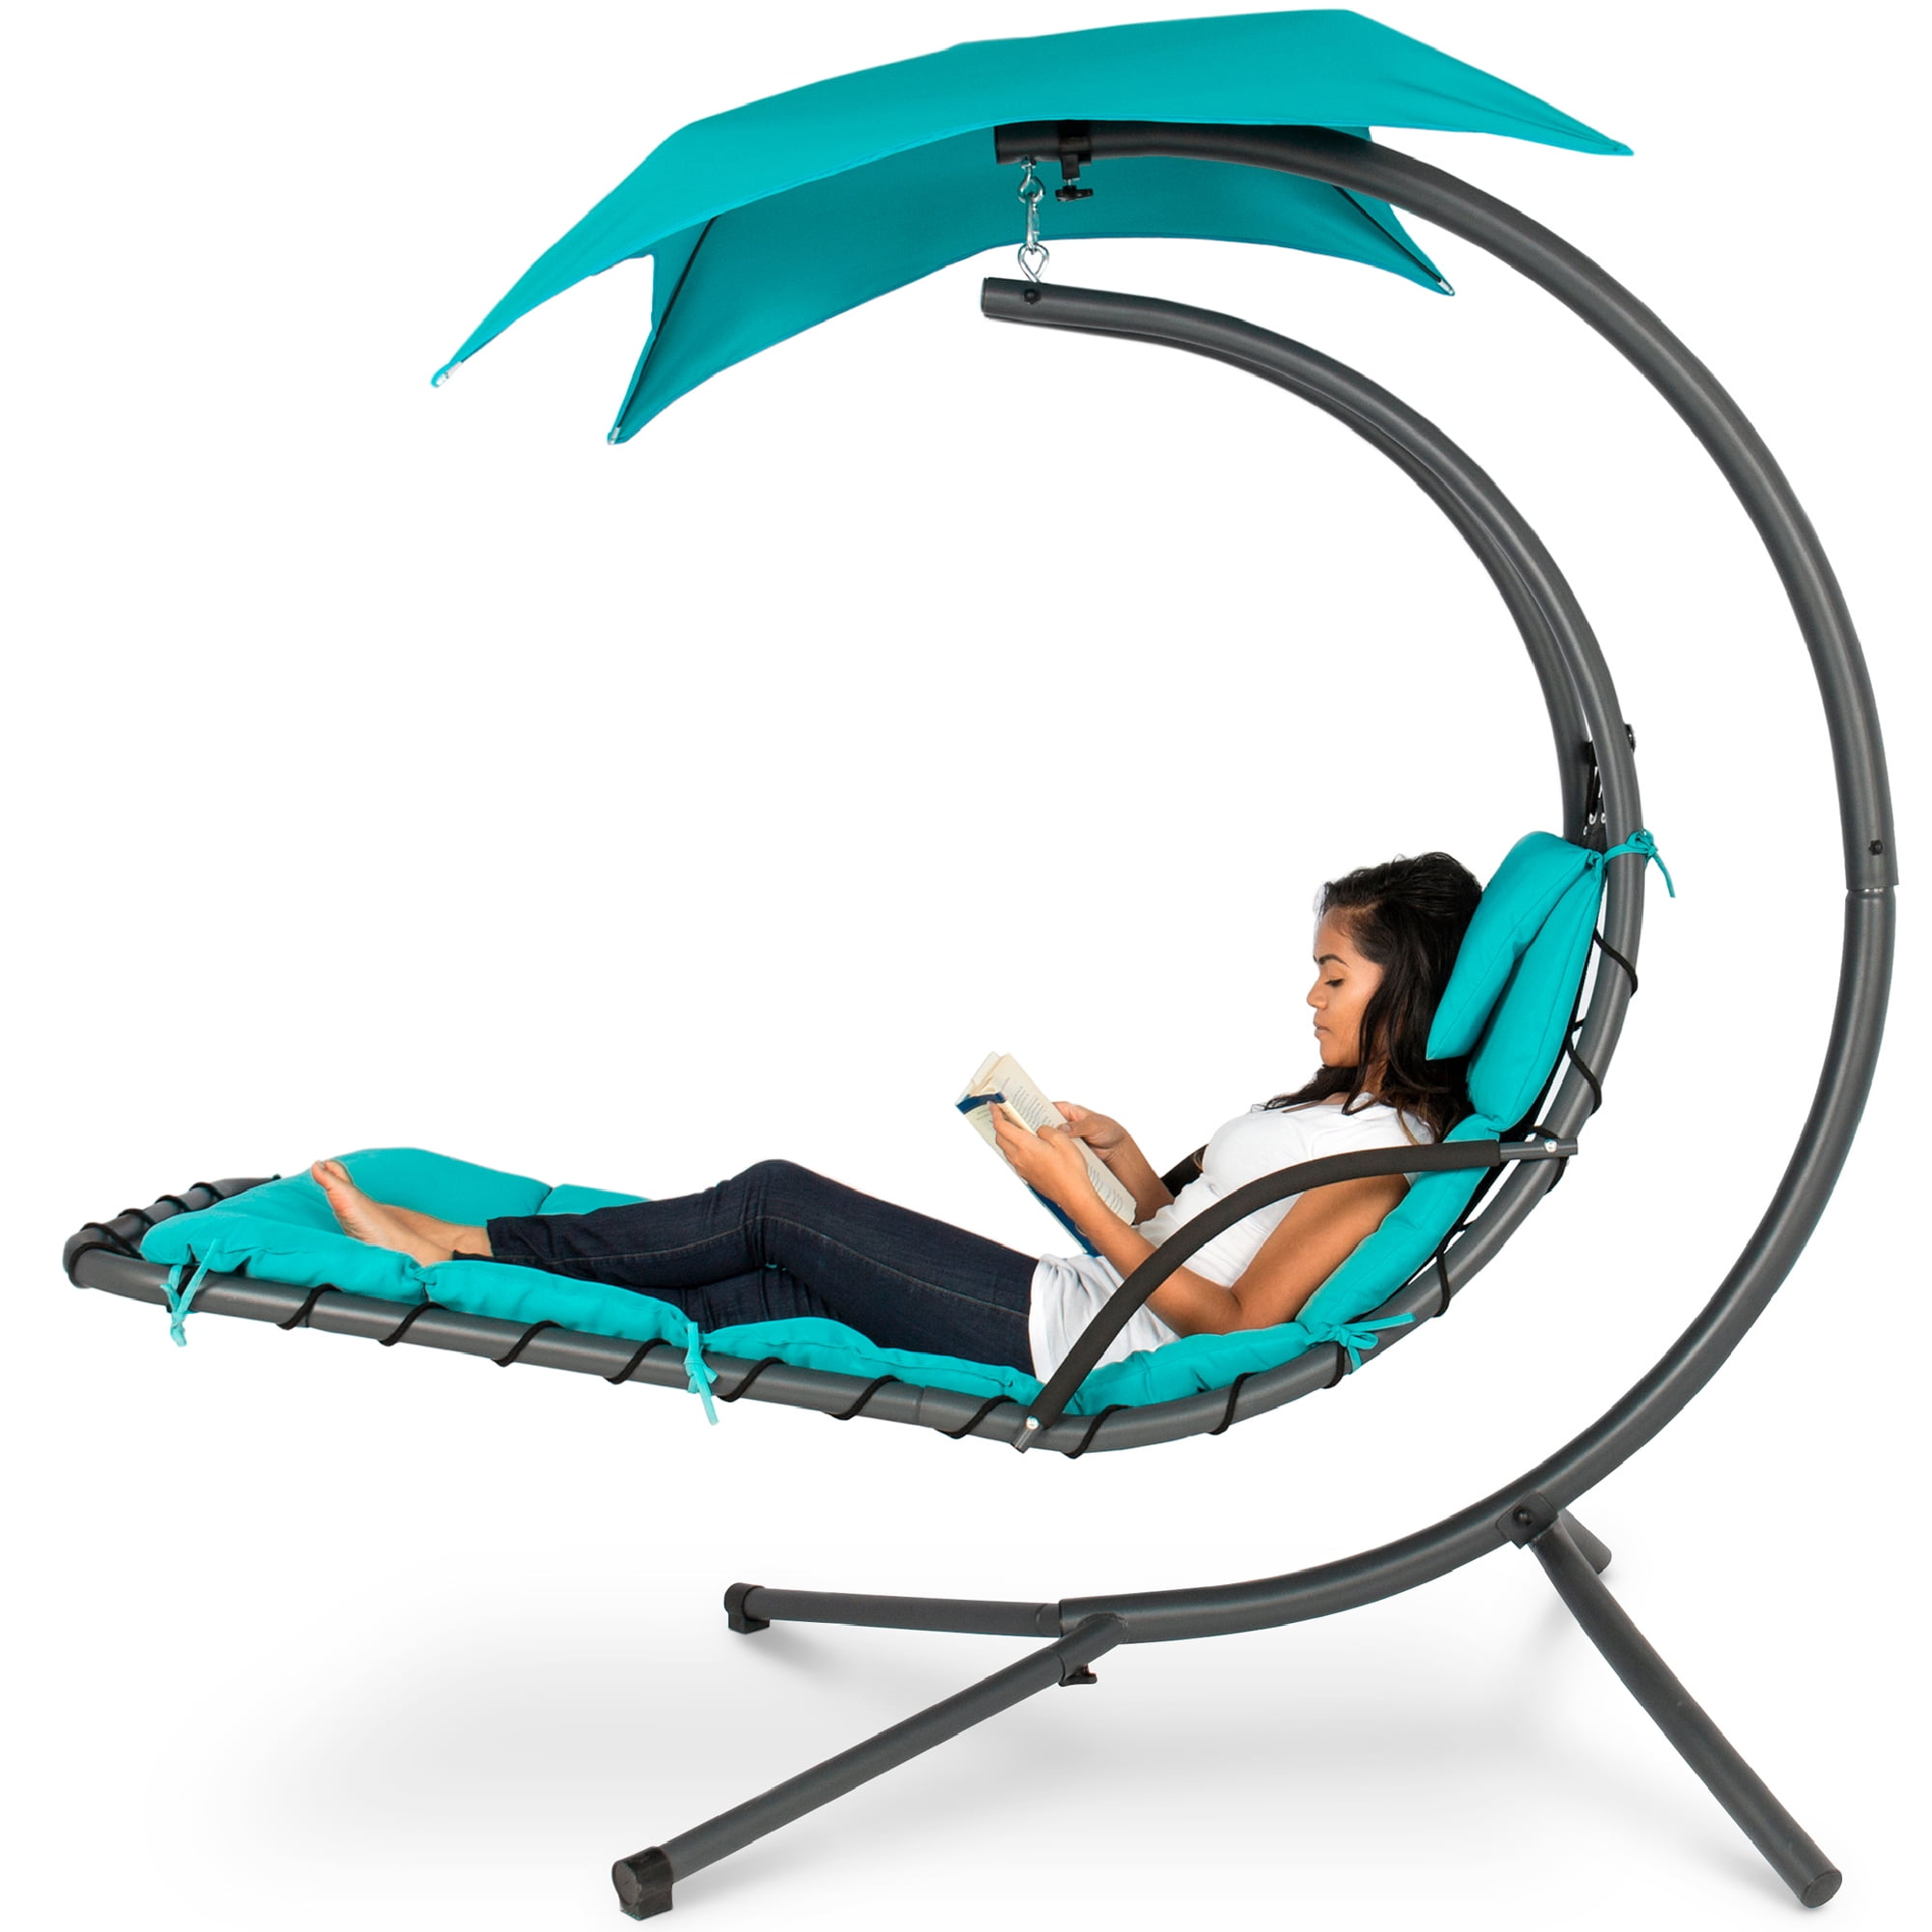 Version 2.0 - Blue Patio and More Ezone Outdoor Hammock Chair Lounge Swing Curved Chaise Lounge Chair Swing for Backyard 